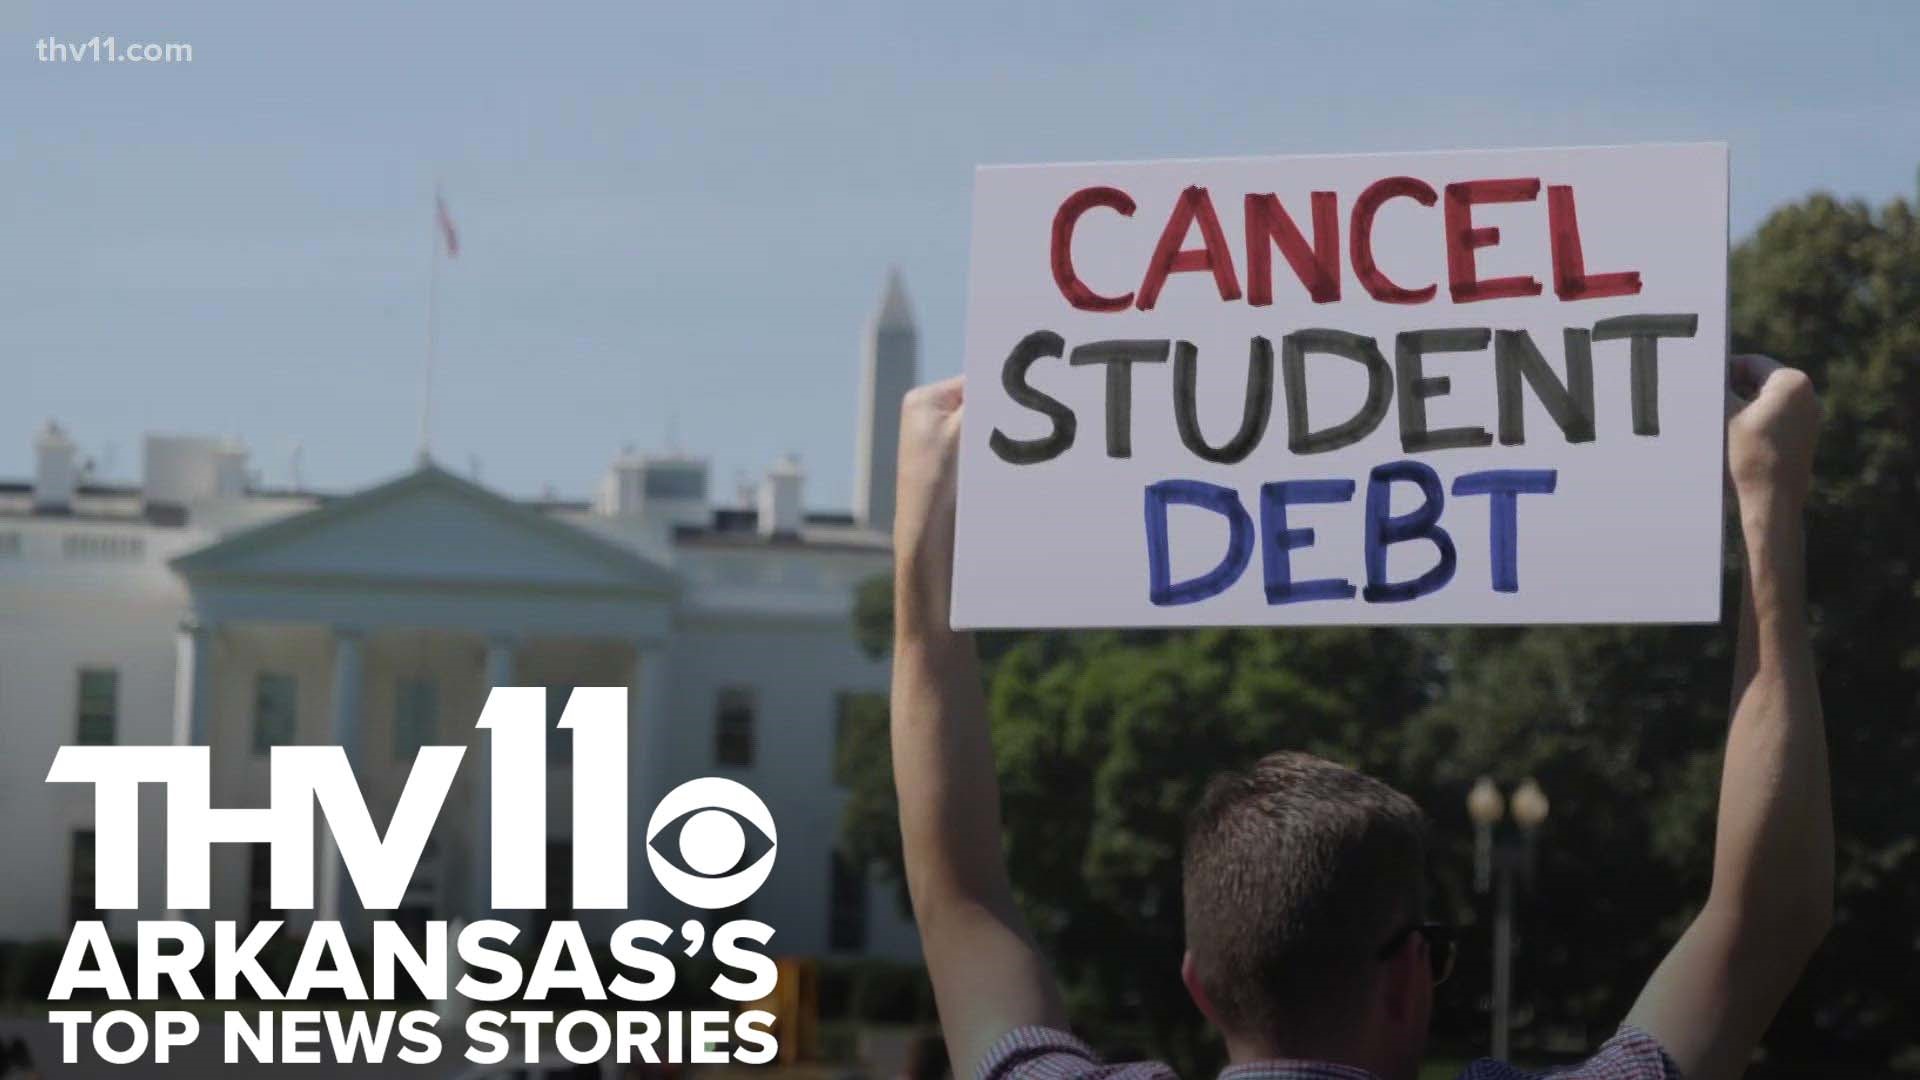 Sarah Horbacewicz provides the top news stories for August 24, 2022 including President Biden's plan for canceling a portion of student debt.